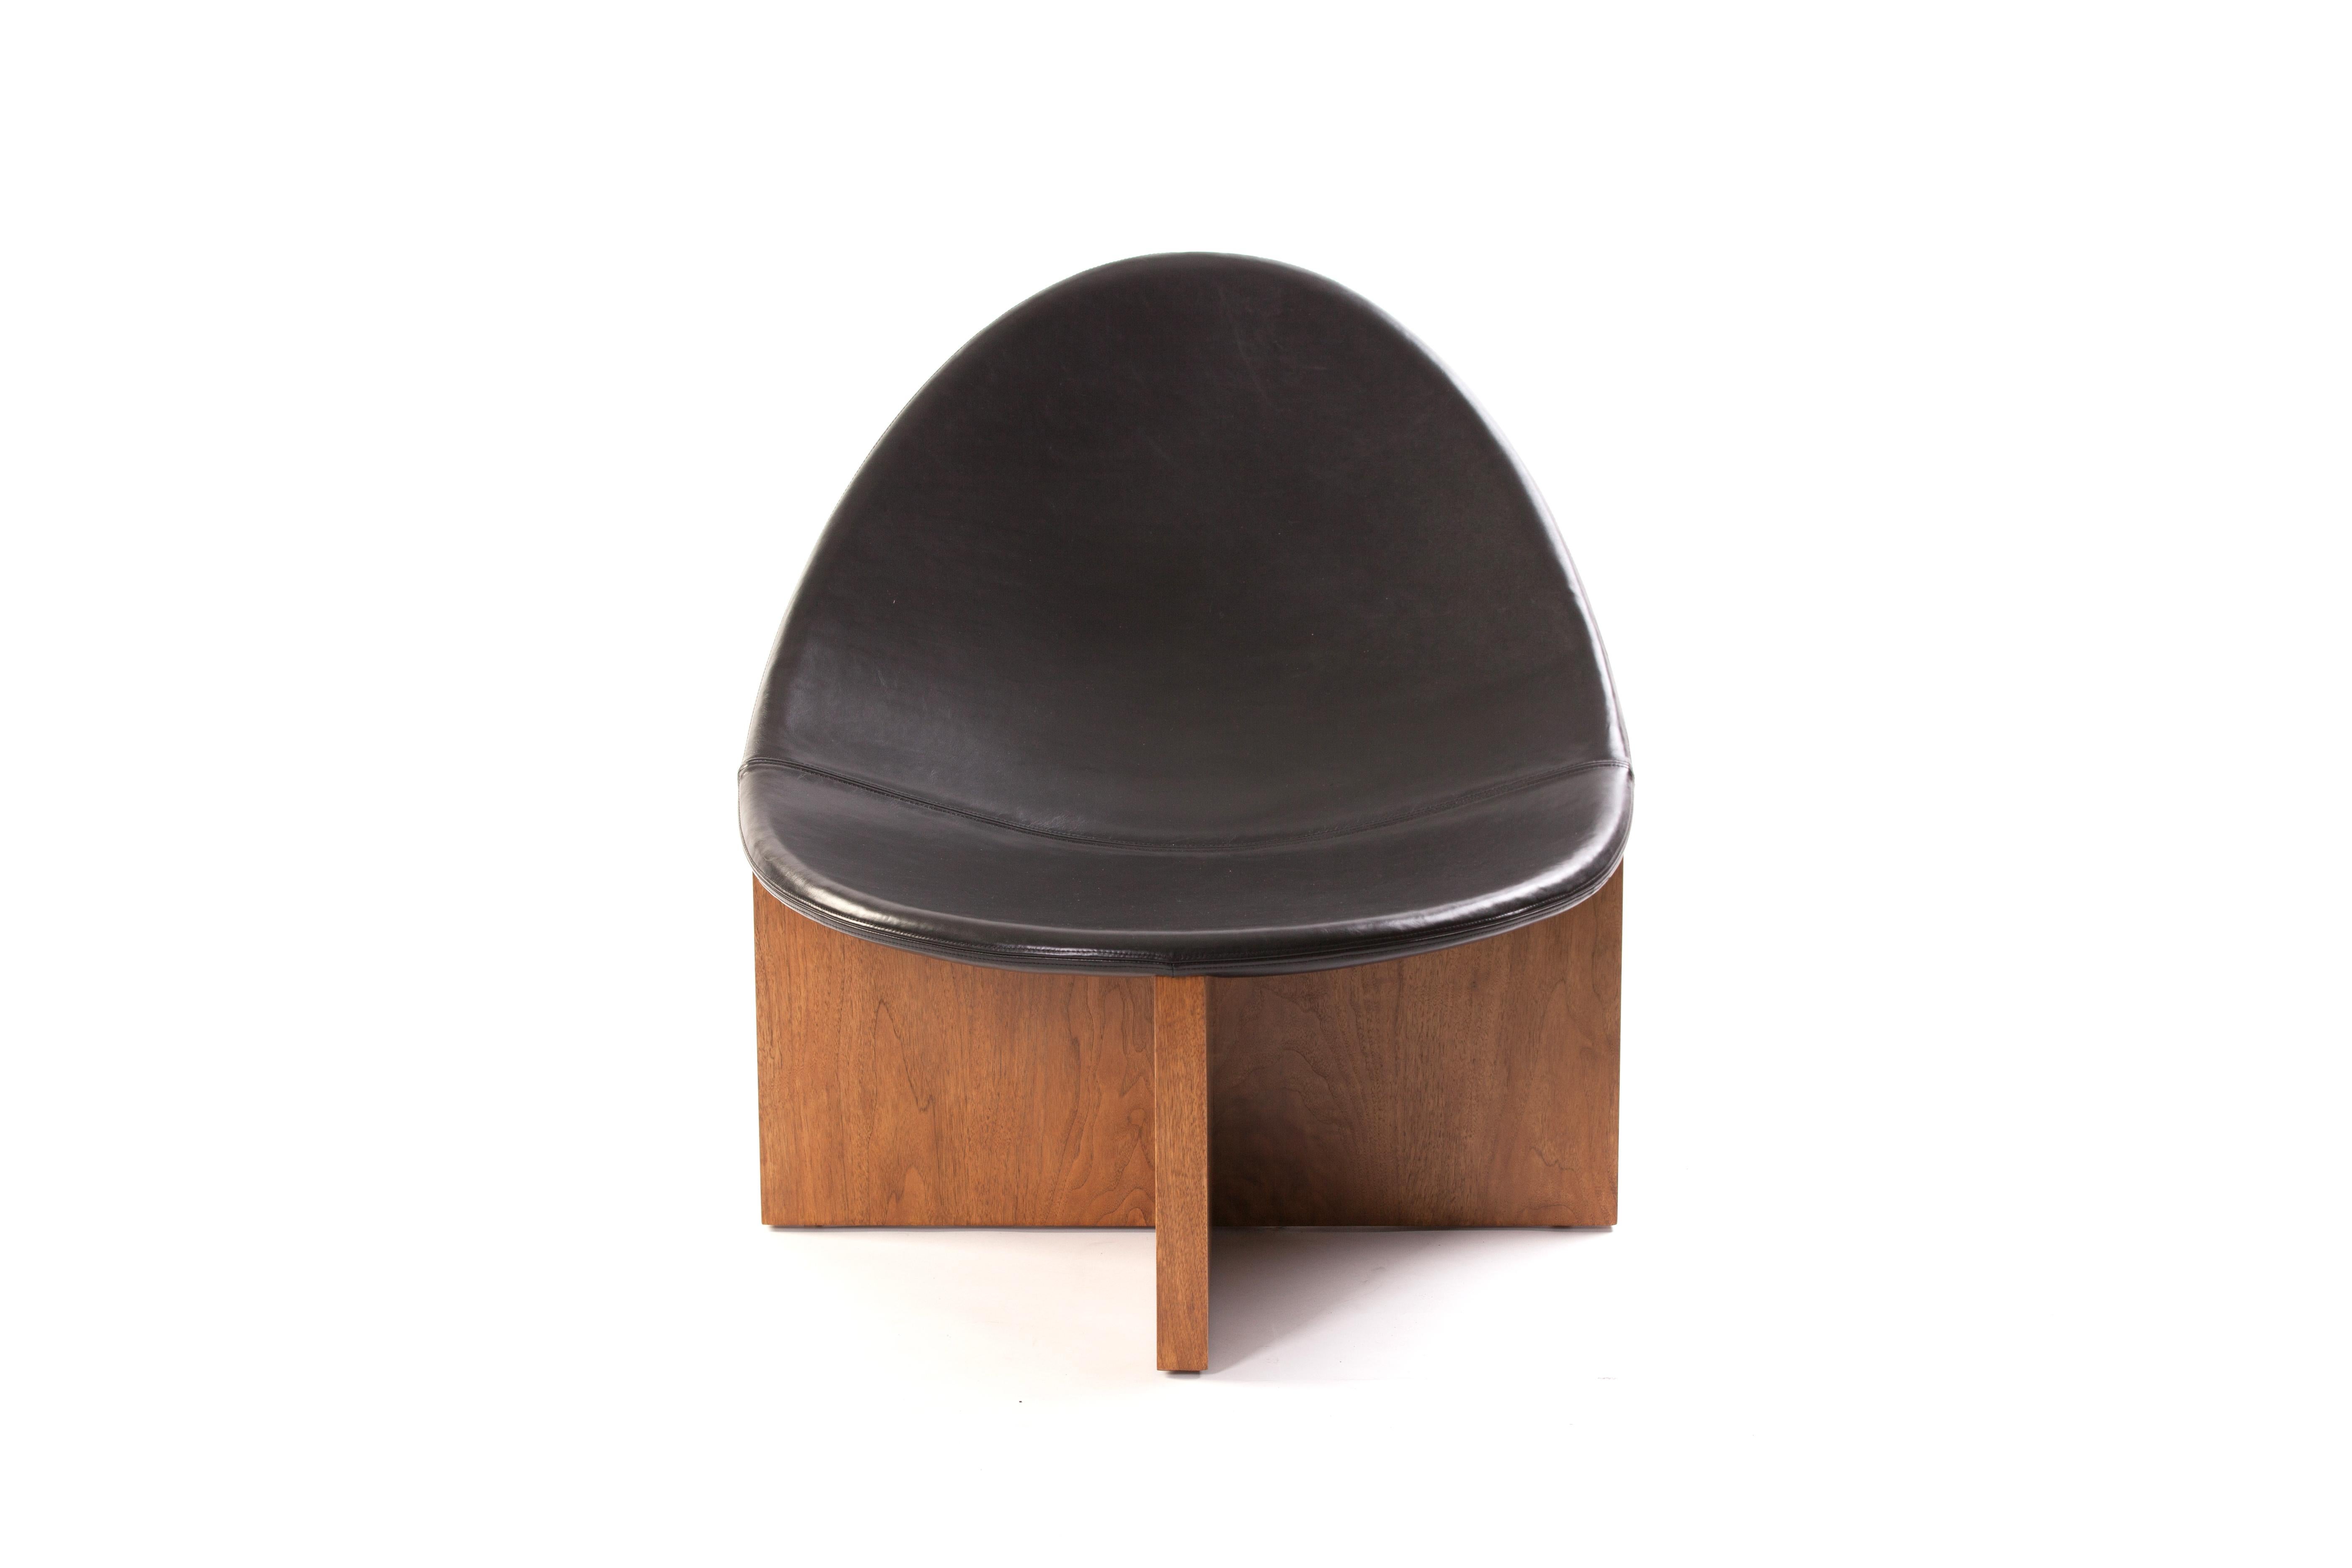 Nido lounge chair with solid walnut base and black leather upholstered seat.The Nido chair was the result of playing with the juxtaposition of shapes. The egg-like shape of the leather upholstered wood seat nesting in the cross shaped solid wood